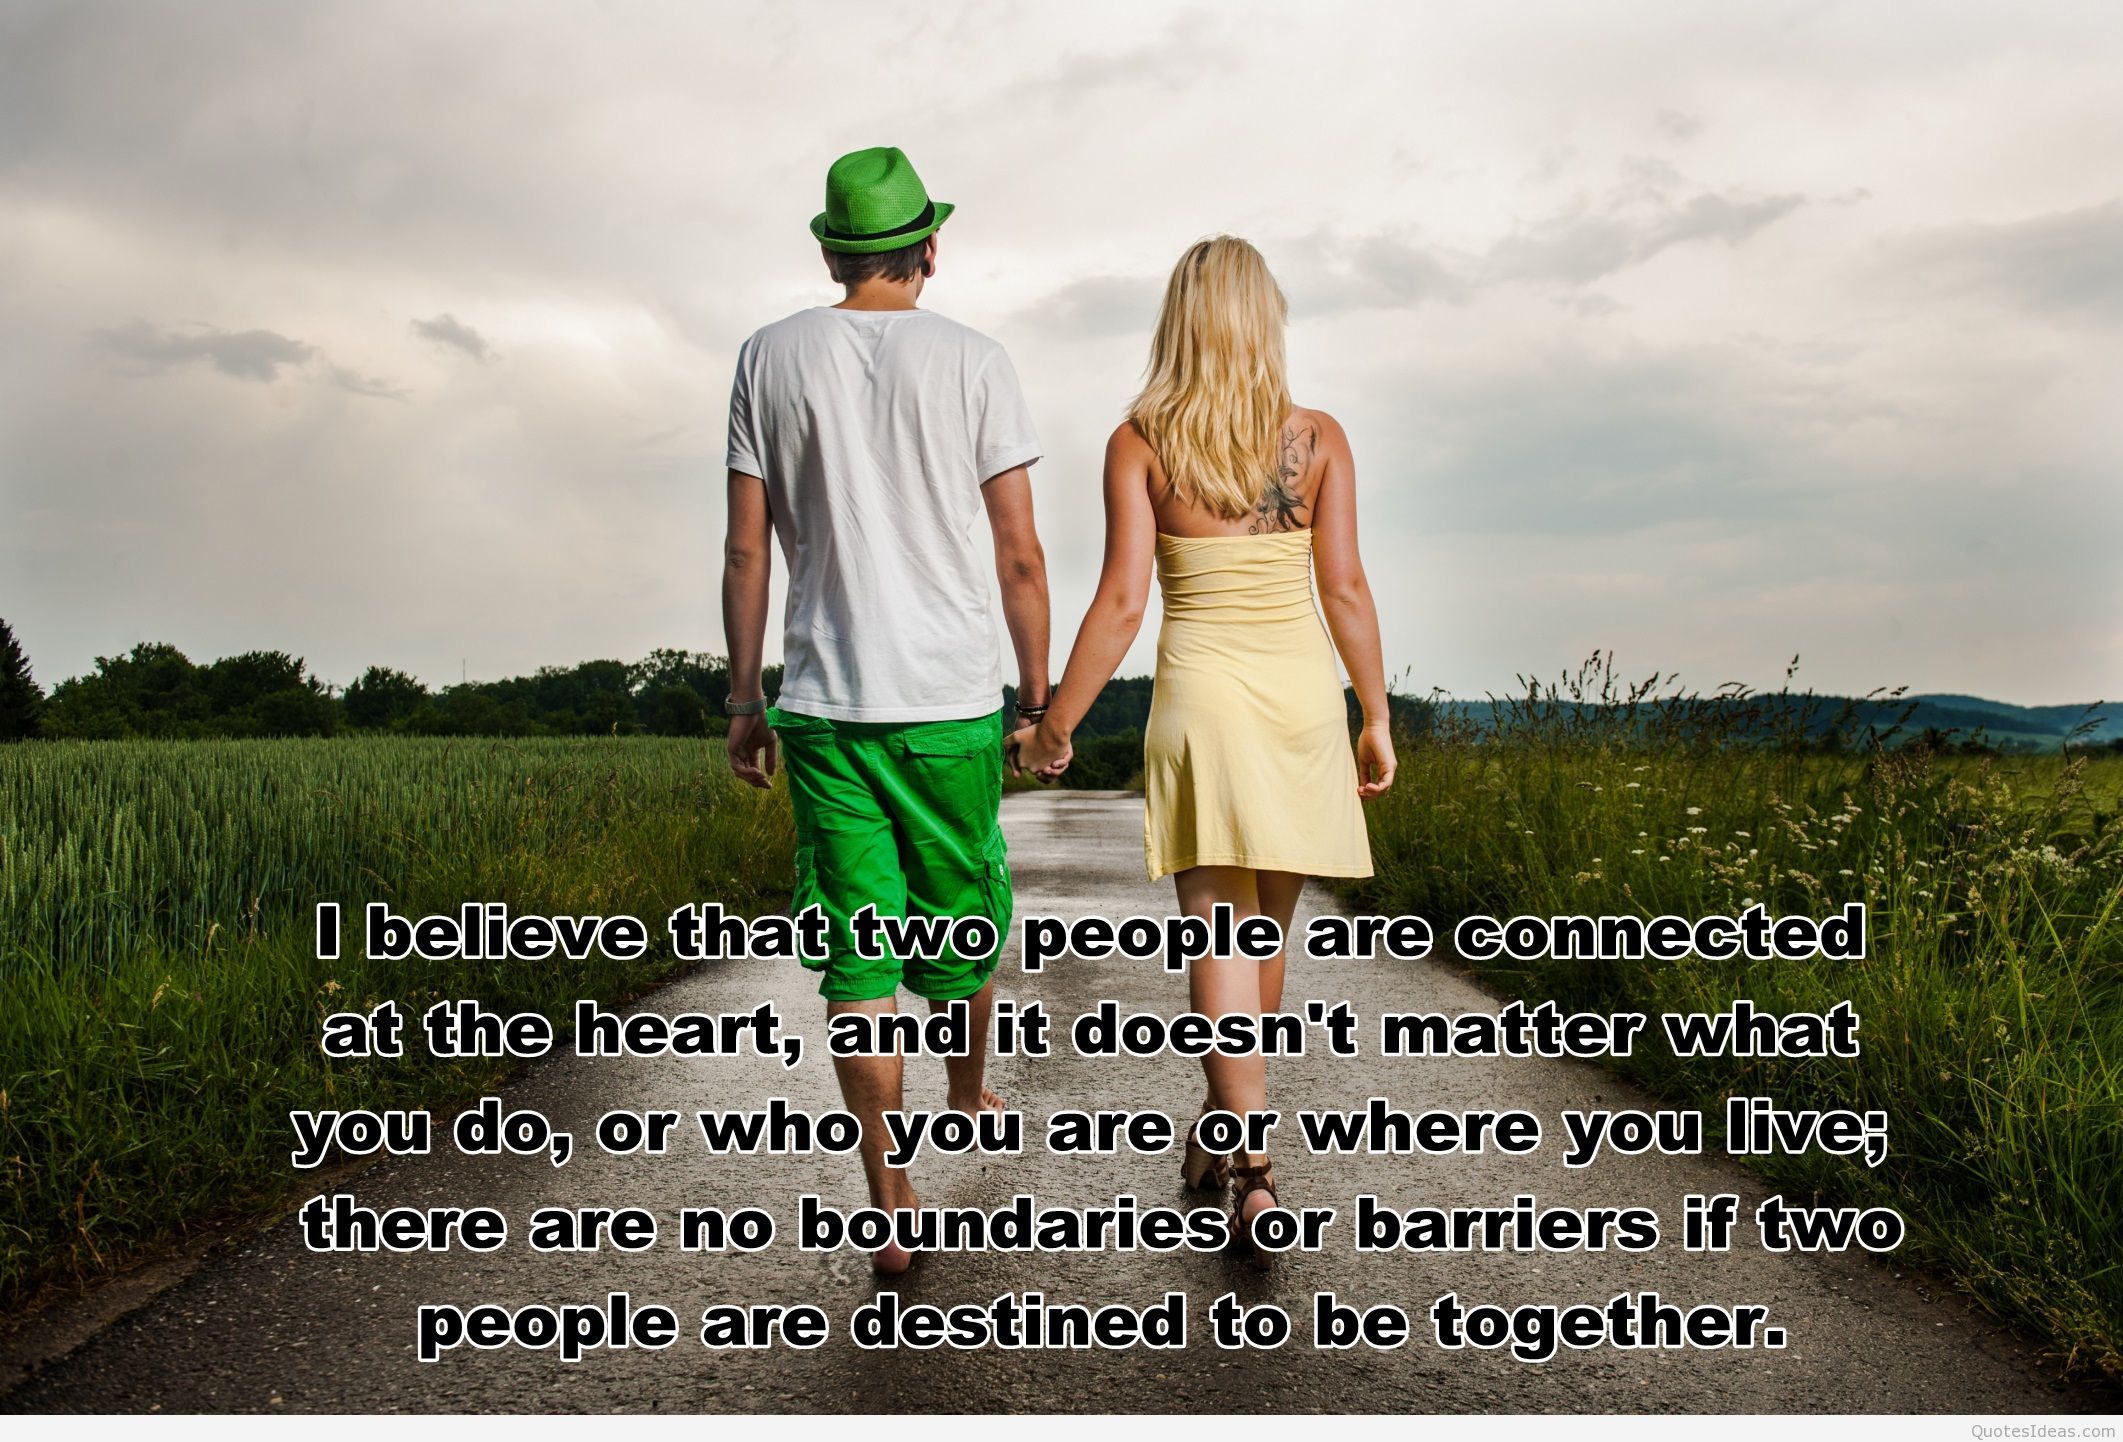 Love relationship quote wallpaper hd